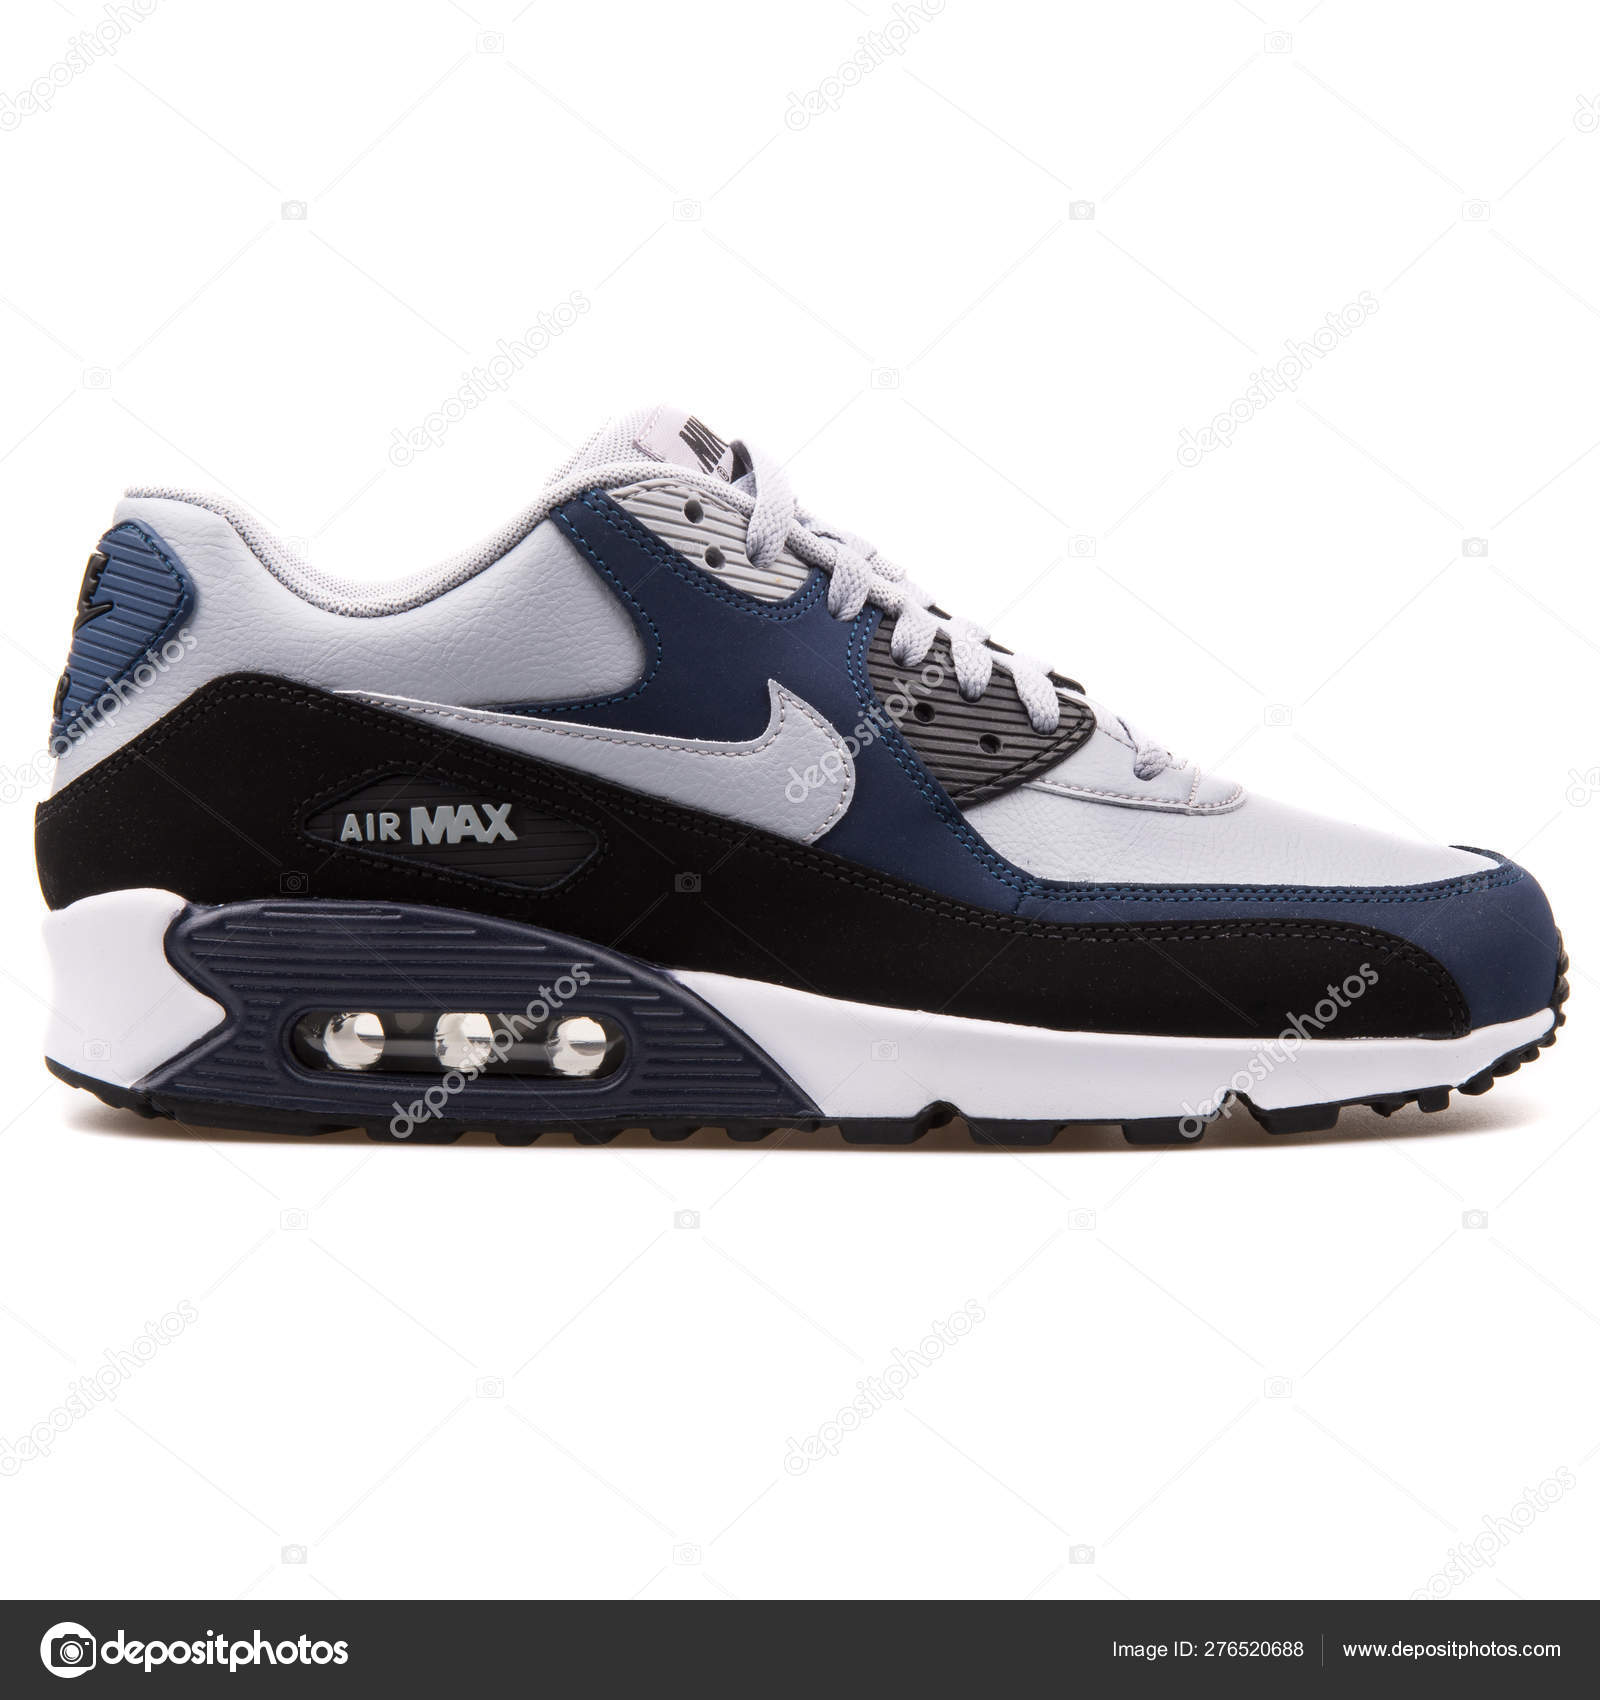 Nike Air Max 90 Leather grey, black and 